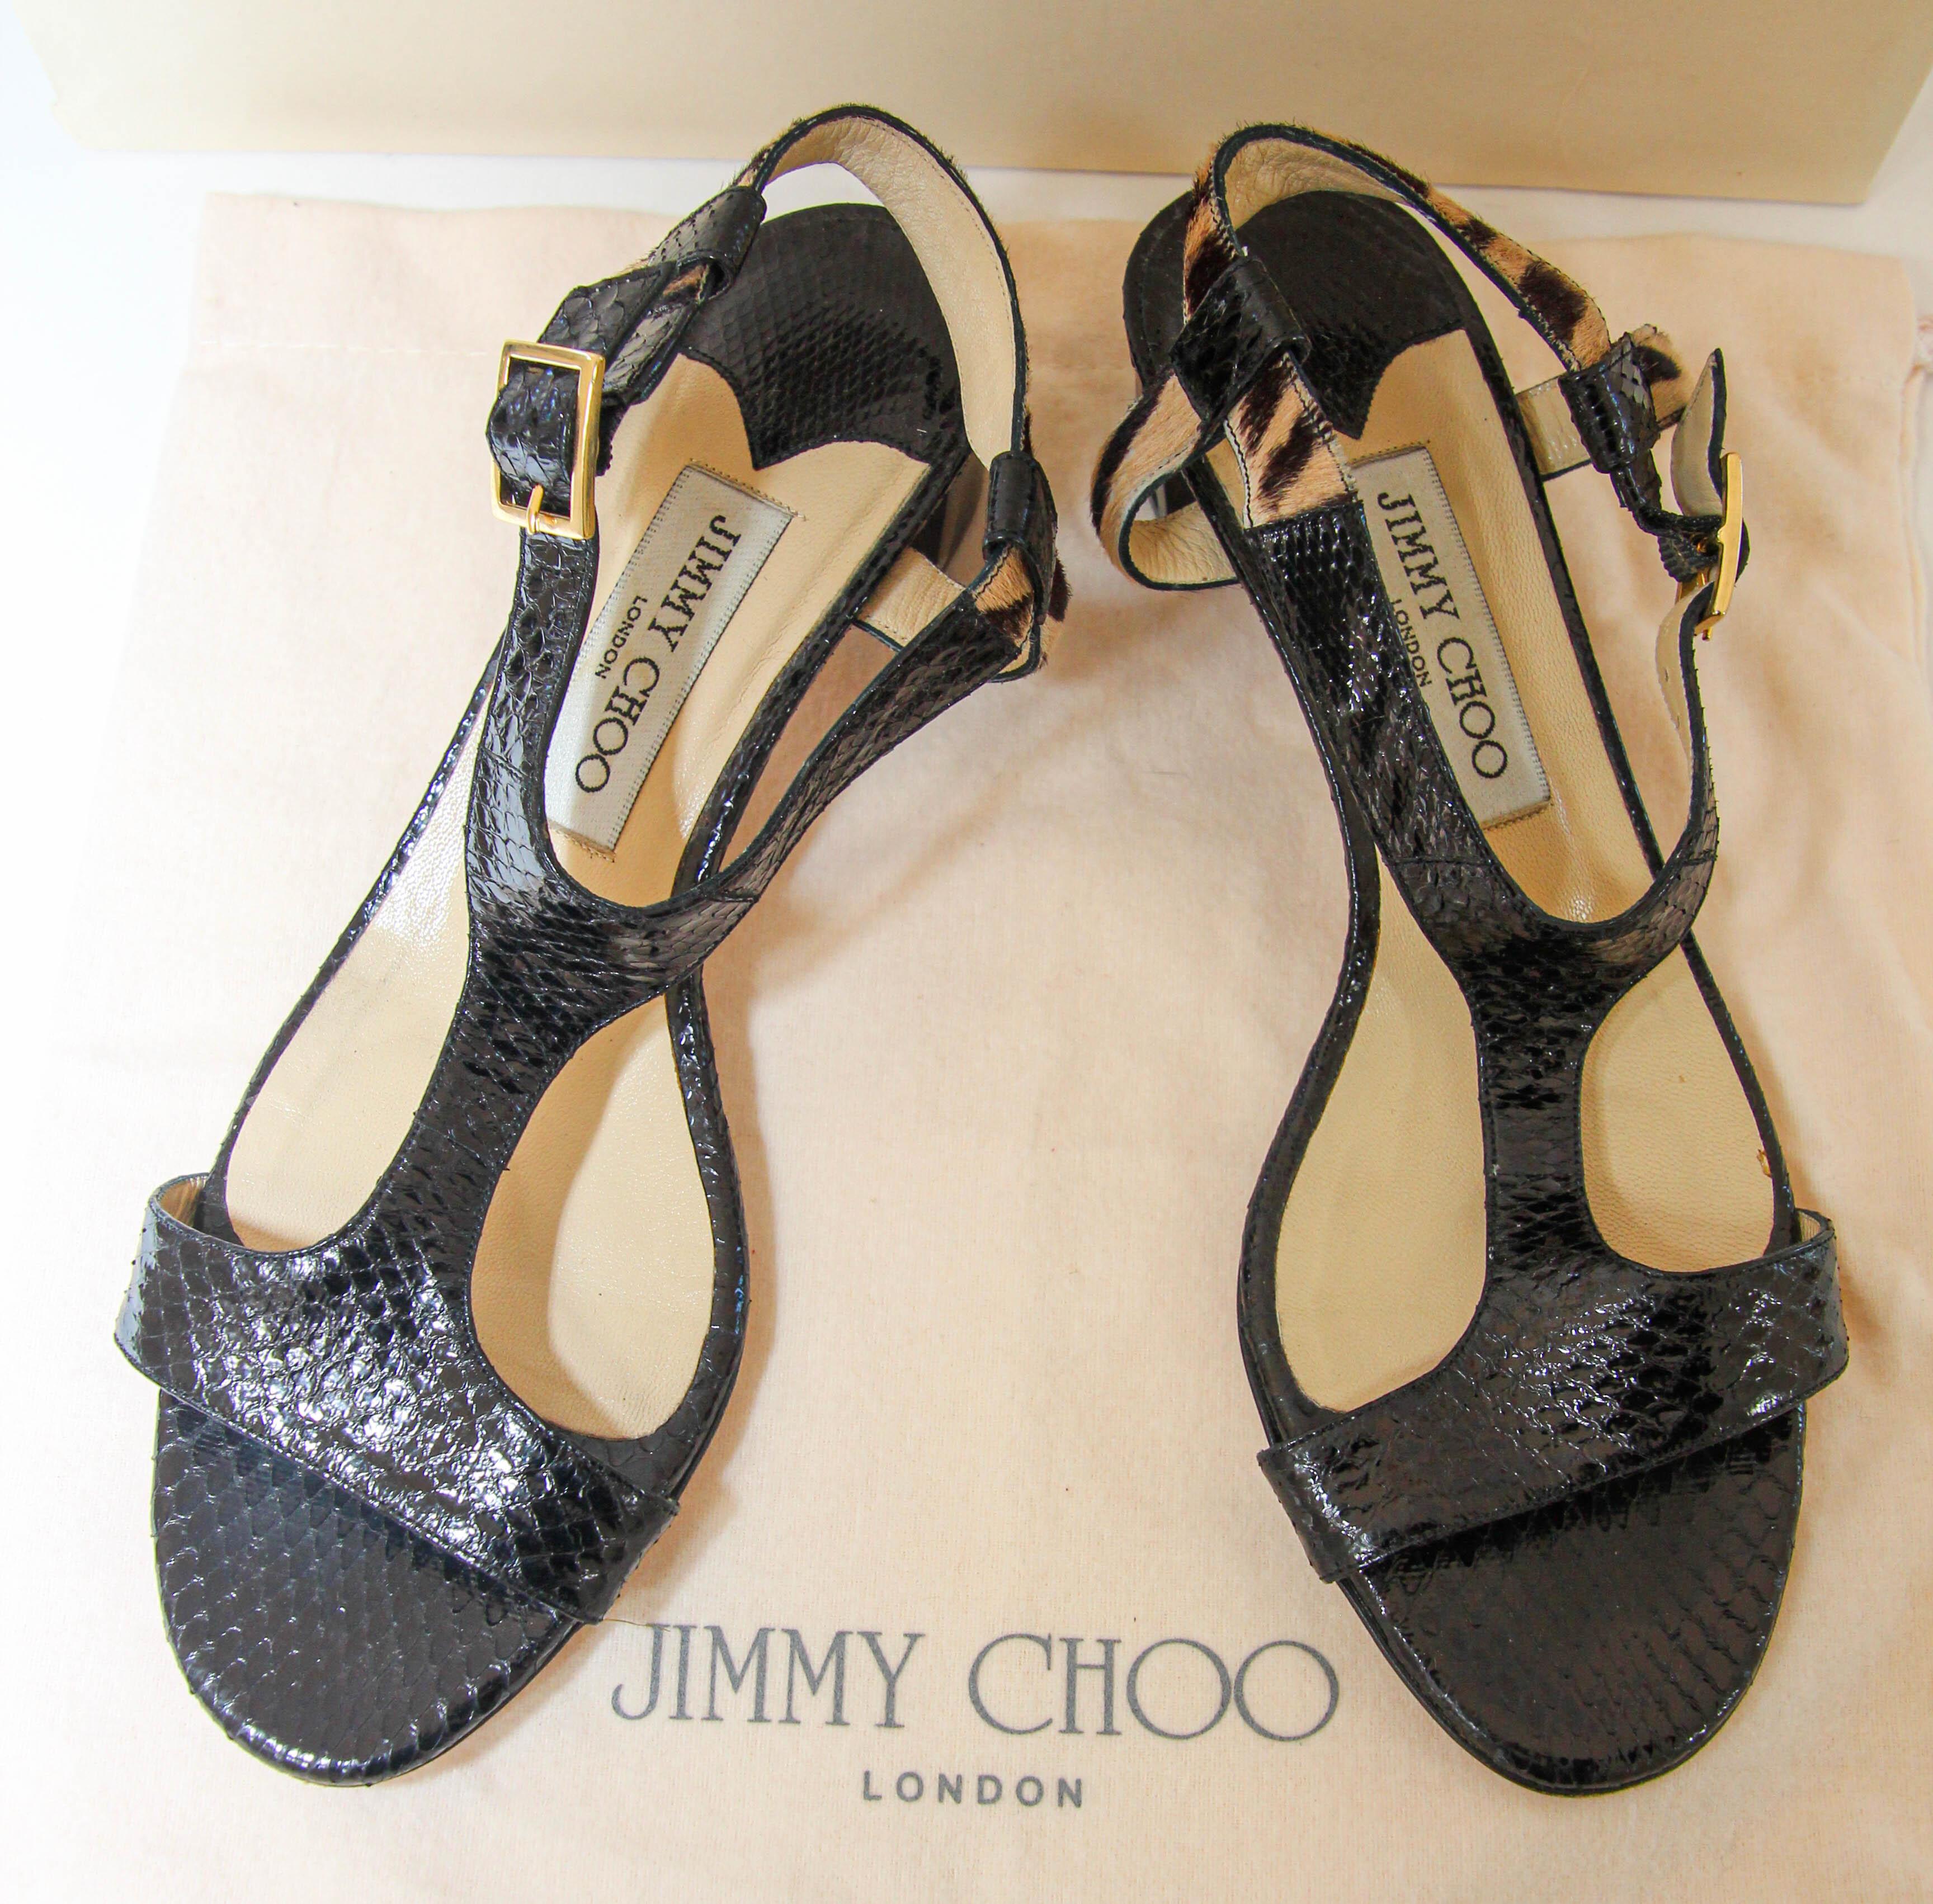 JIMMY CHOO black leather JIN T-Strap Slingback with Pony Hair.
Shoes 38.
100% authentic Jimmy Choo 'Jin' slingback sandals in black snake design leather with block-heel. 
Come with dust bag and box.
Made in Italy.
Jimmy Choo London
Imprinted Size